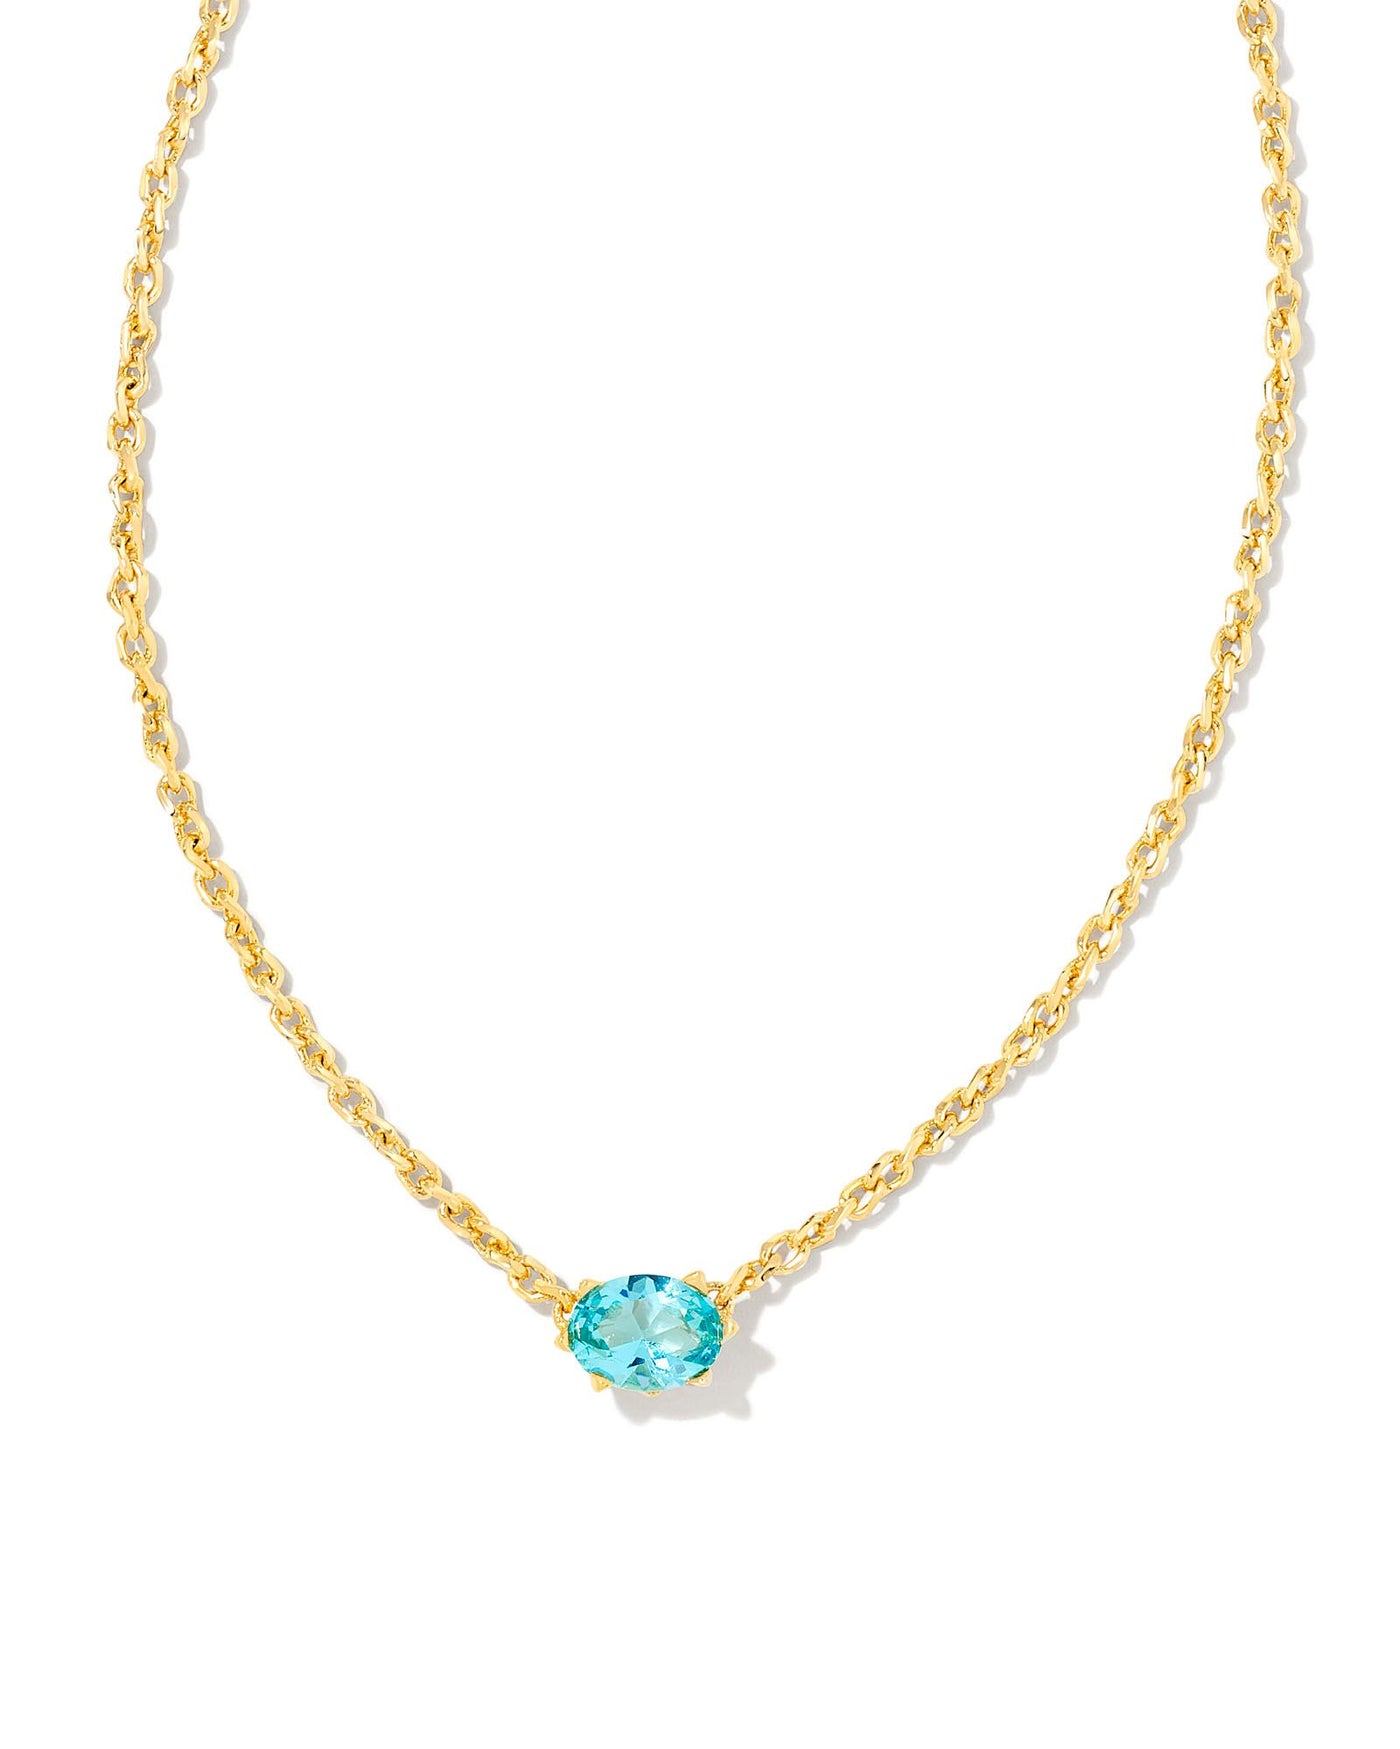 Cailin Crystal Pendant Necklace Gold Aqua Crystal on white background, front view.